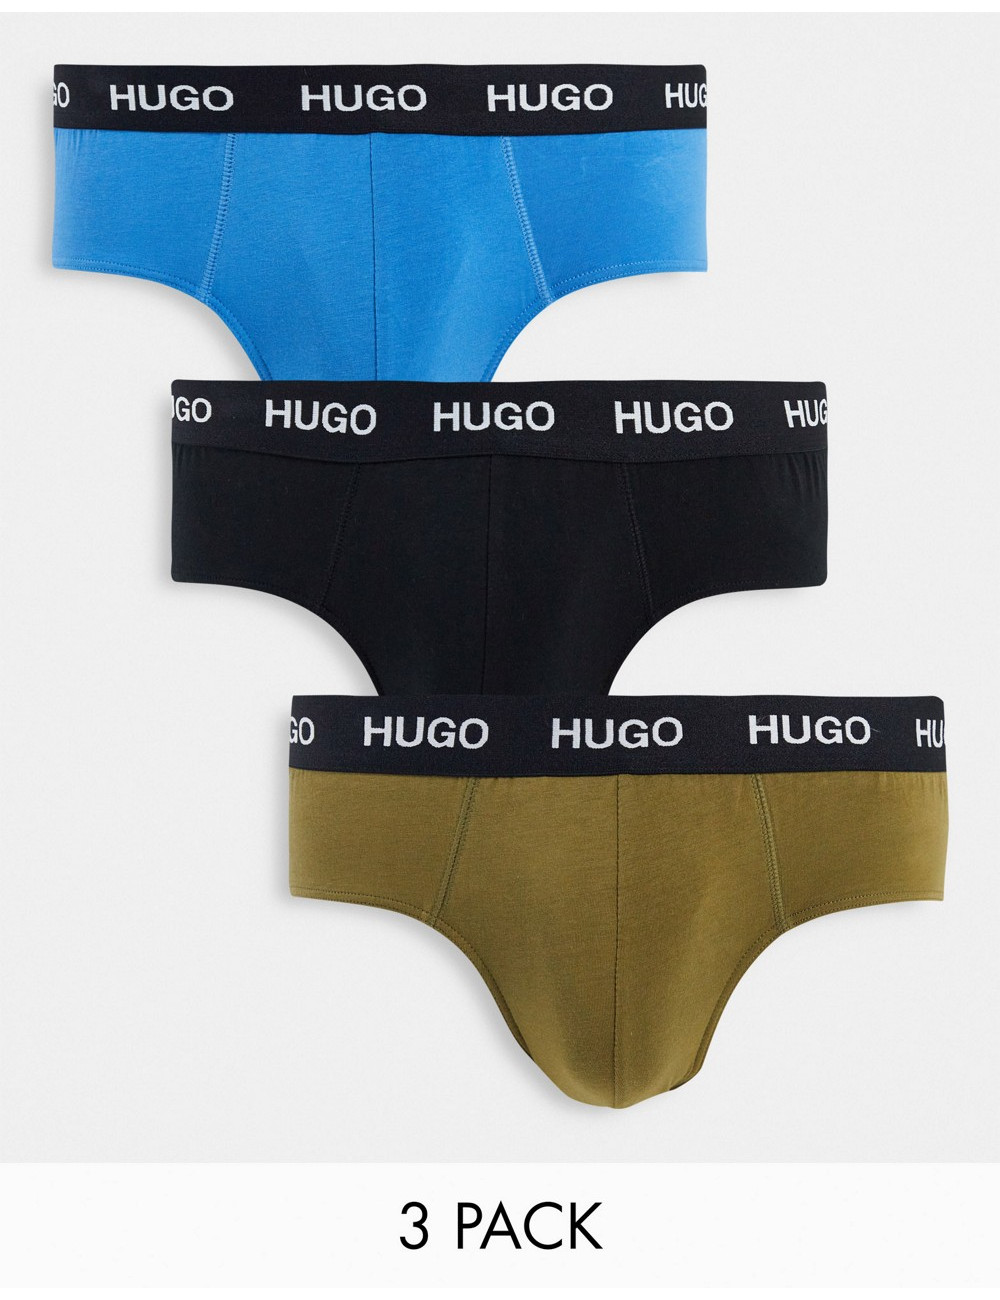 HUGO 3 pack briefs with all...